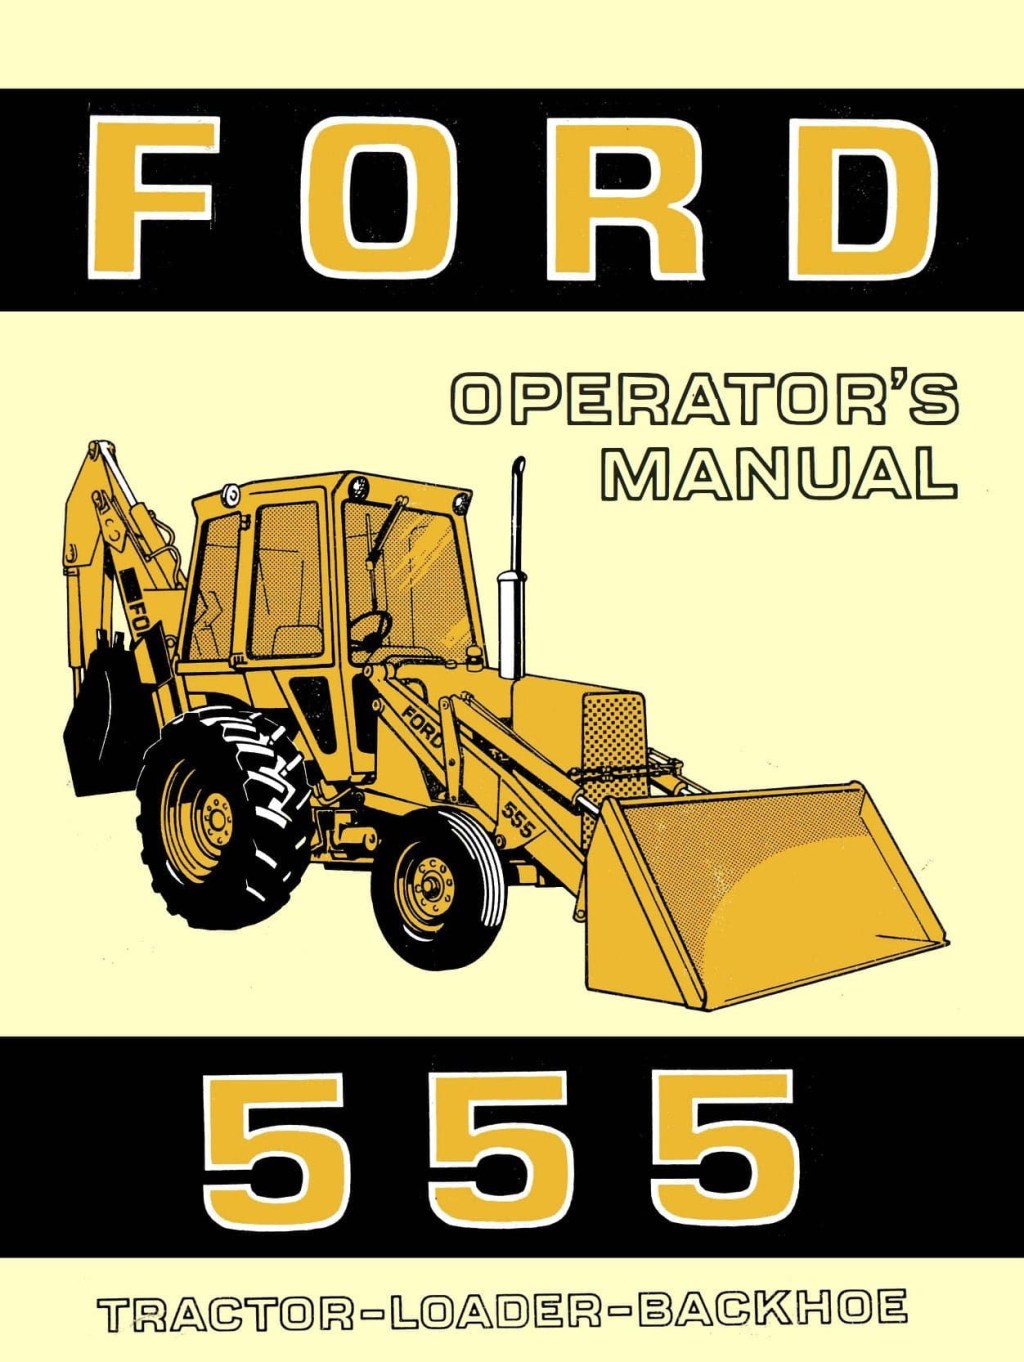 Picture of: Ford  Tractor-Loader-Backhoe – Operator’s Manual